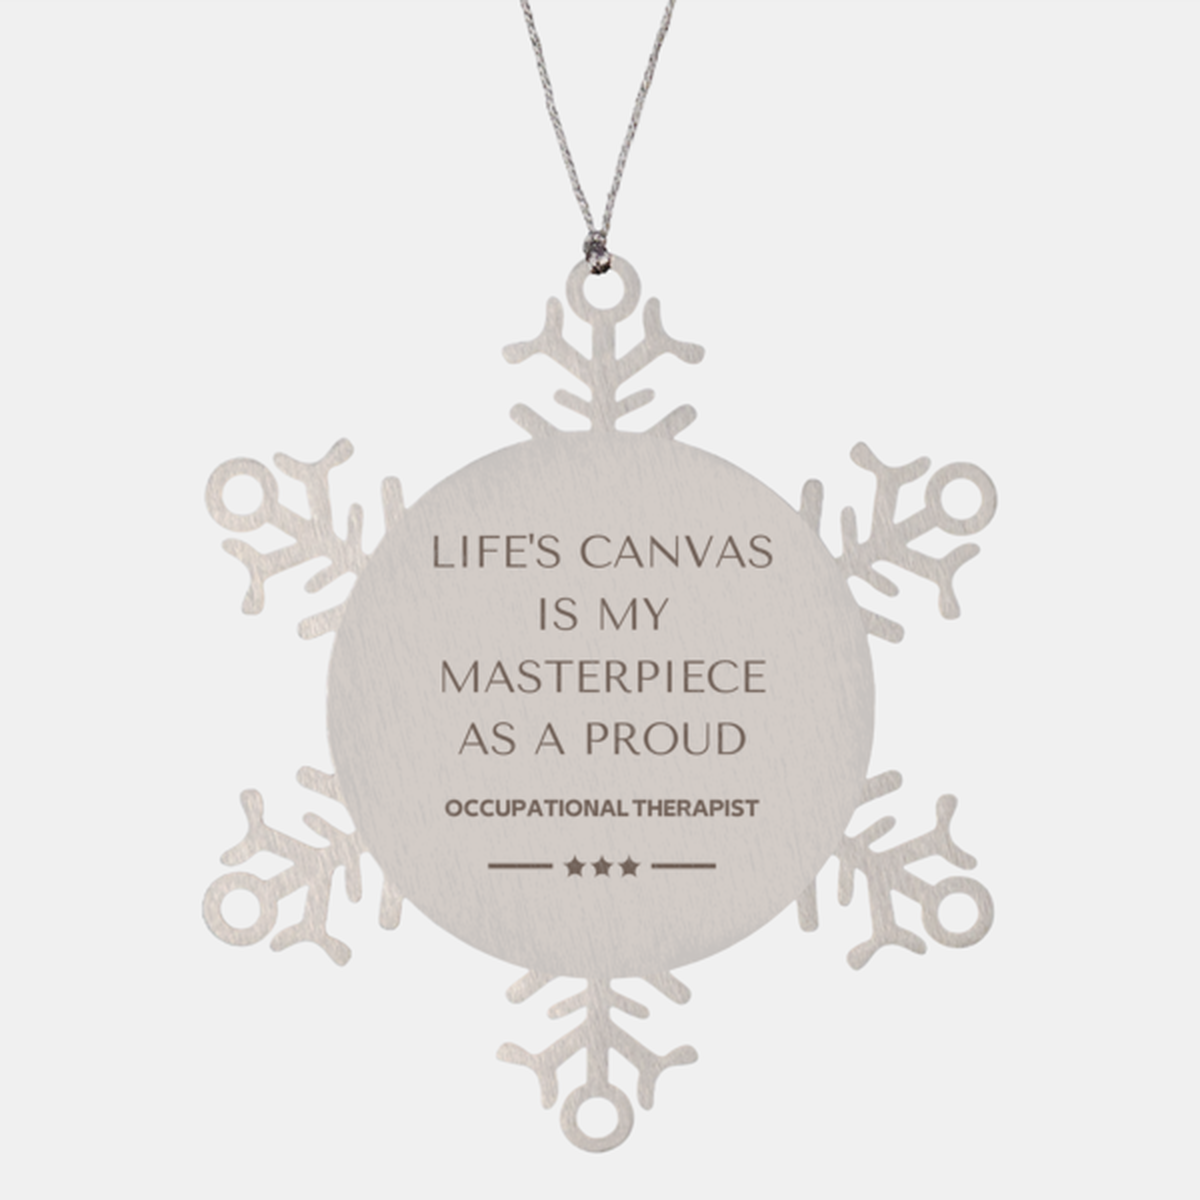 Proud Occupational Therapist Gifts, Life's canvas is my masterpiece, Epic Birthday Christmas Unique Snowflake Ornament For Occupational Therapist, Coworkers, Men, Women, Friends